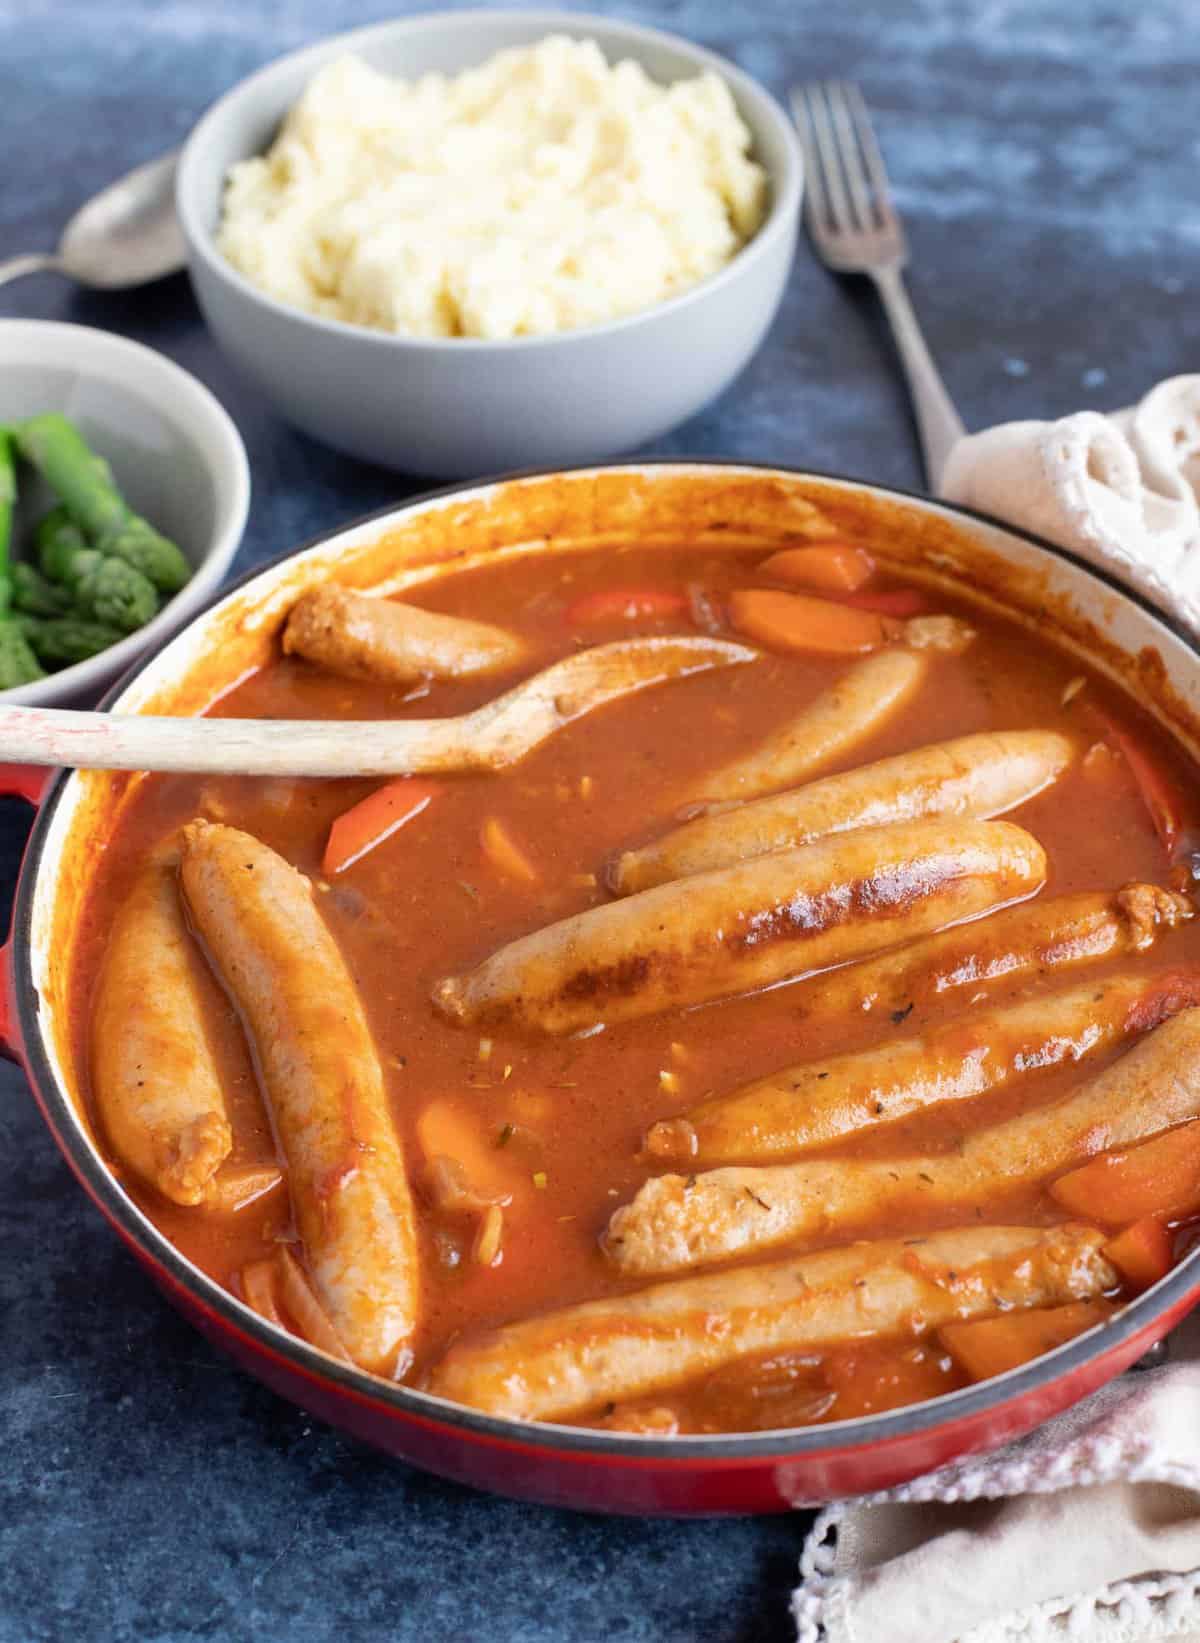 Easy sausage casserole with mashed potato.